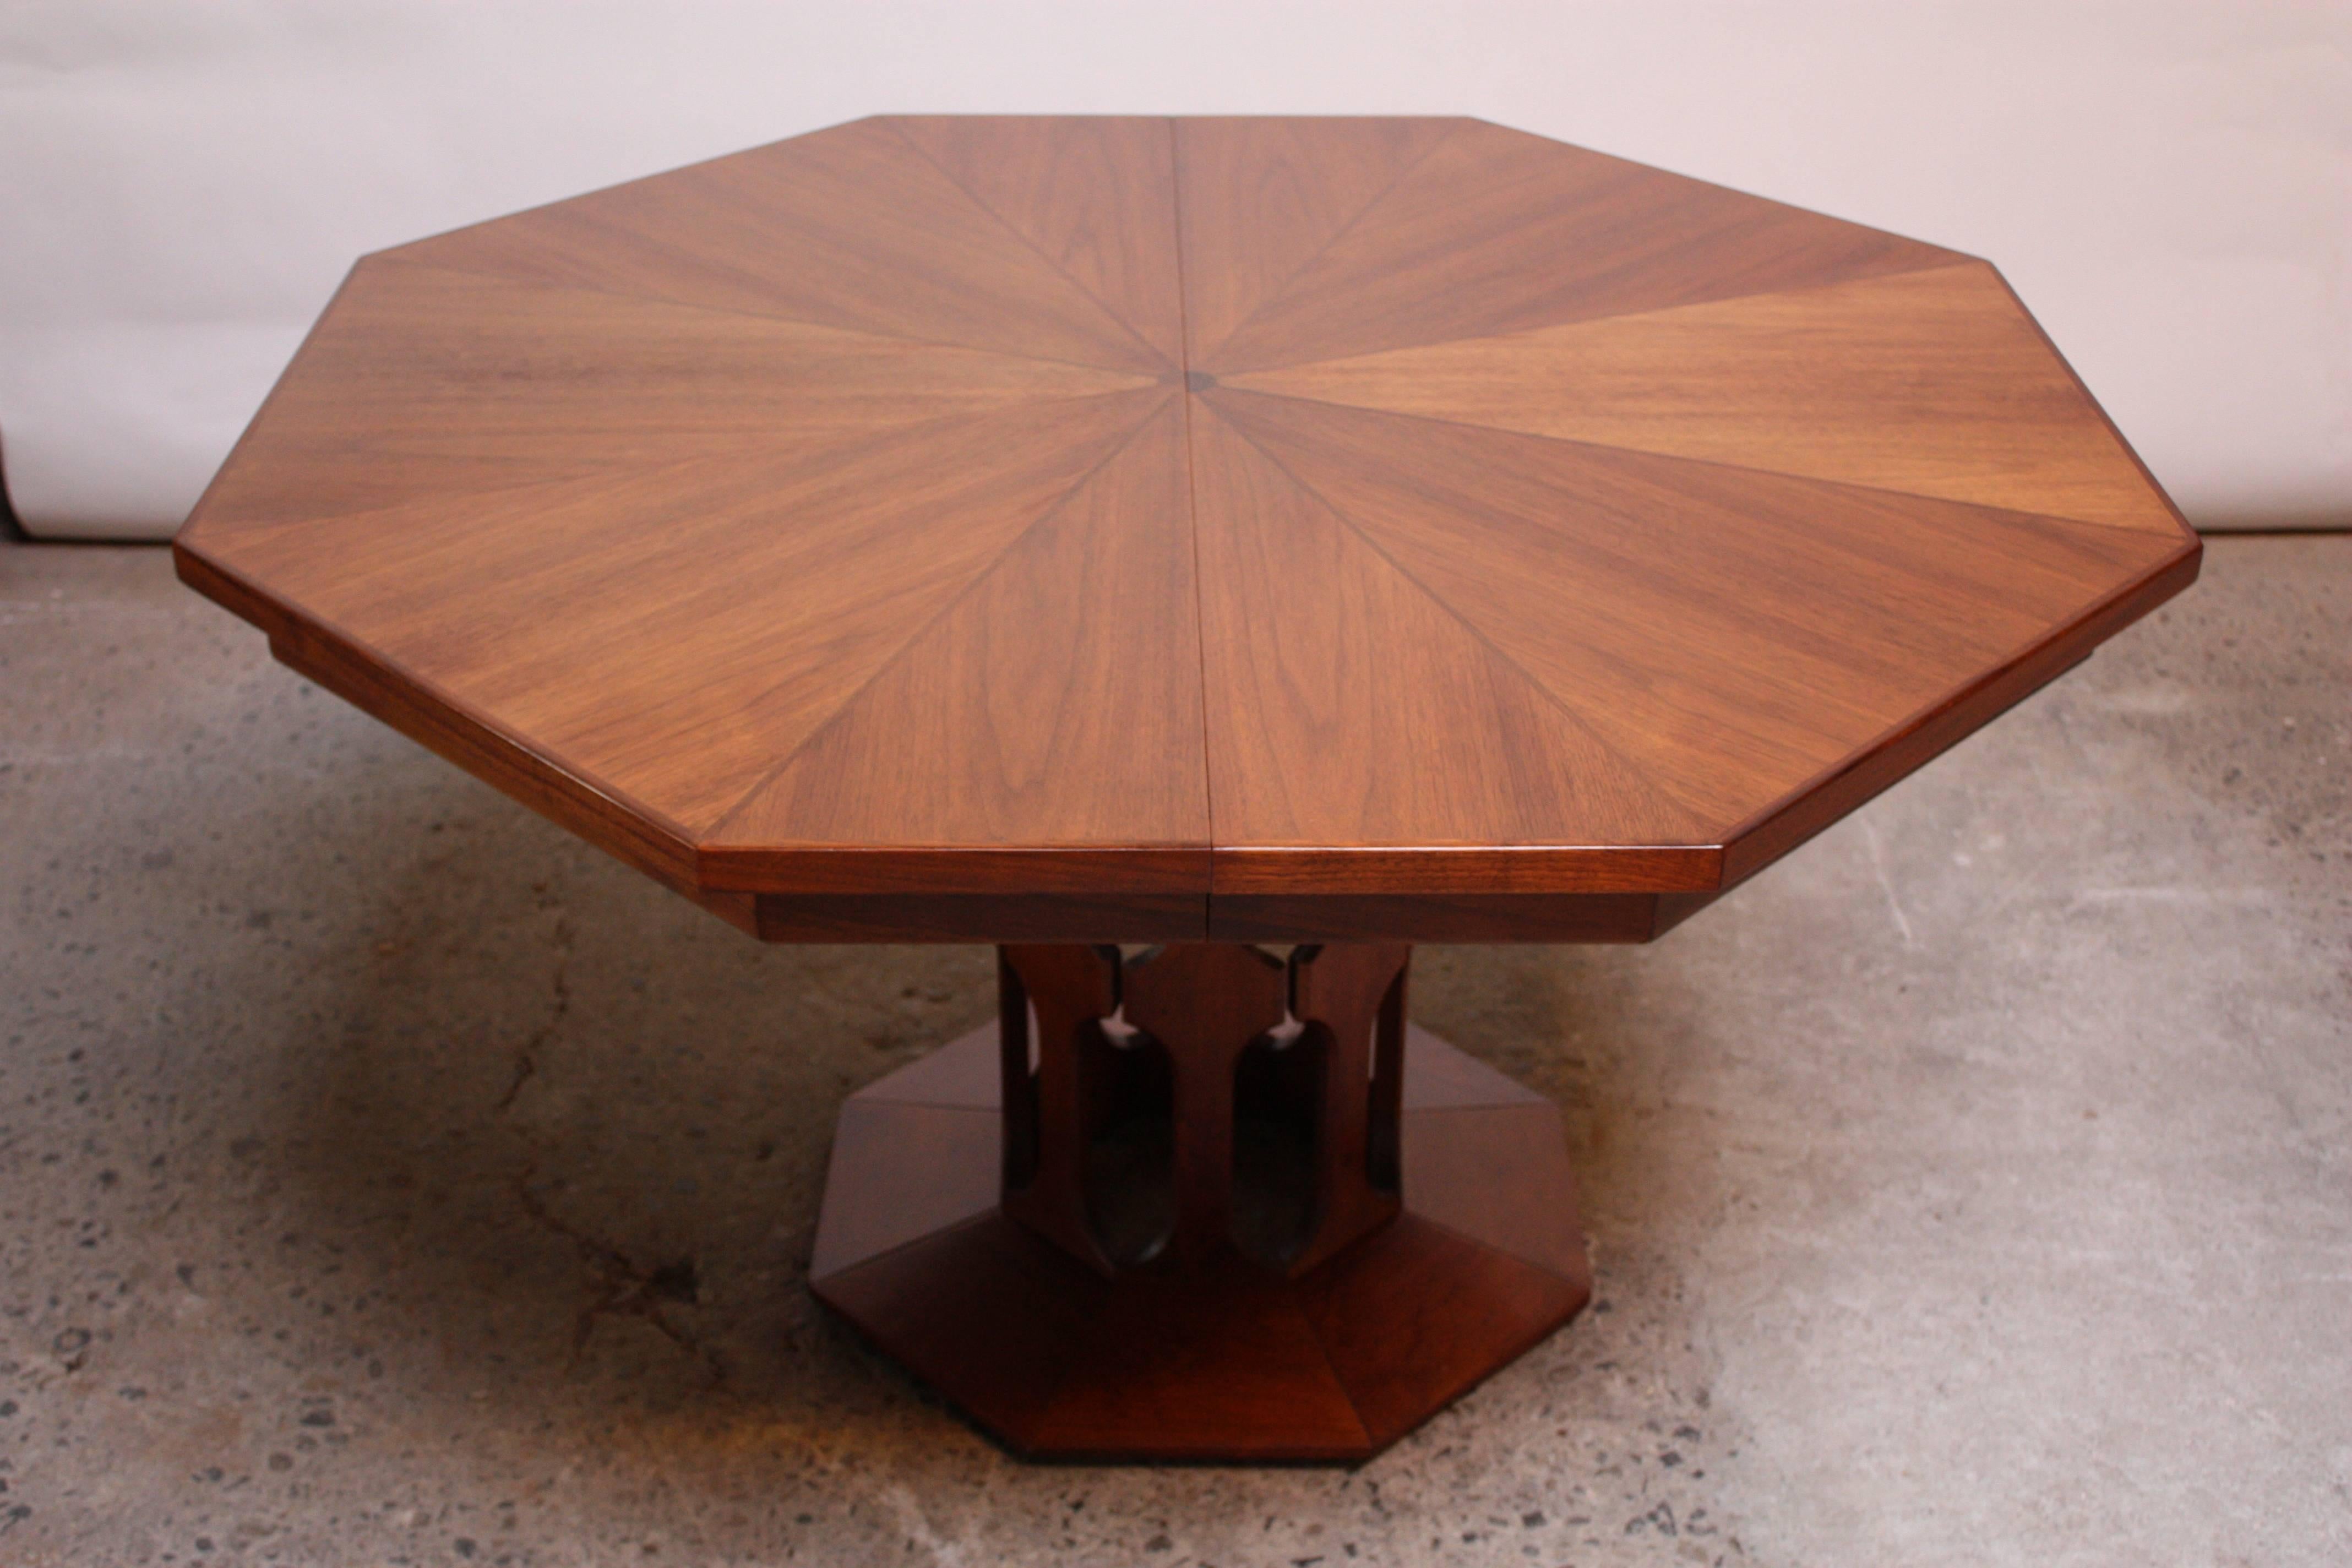 This octagonal walnut dining table (attributed to Harvey Probber) features an inlaid top on a cut-out pedestal base. This table is complete and includes all three original leaves. The pedestal base can support the top with one or even  two leaves